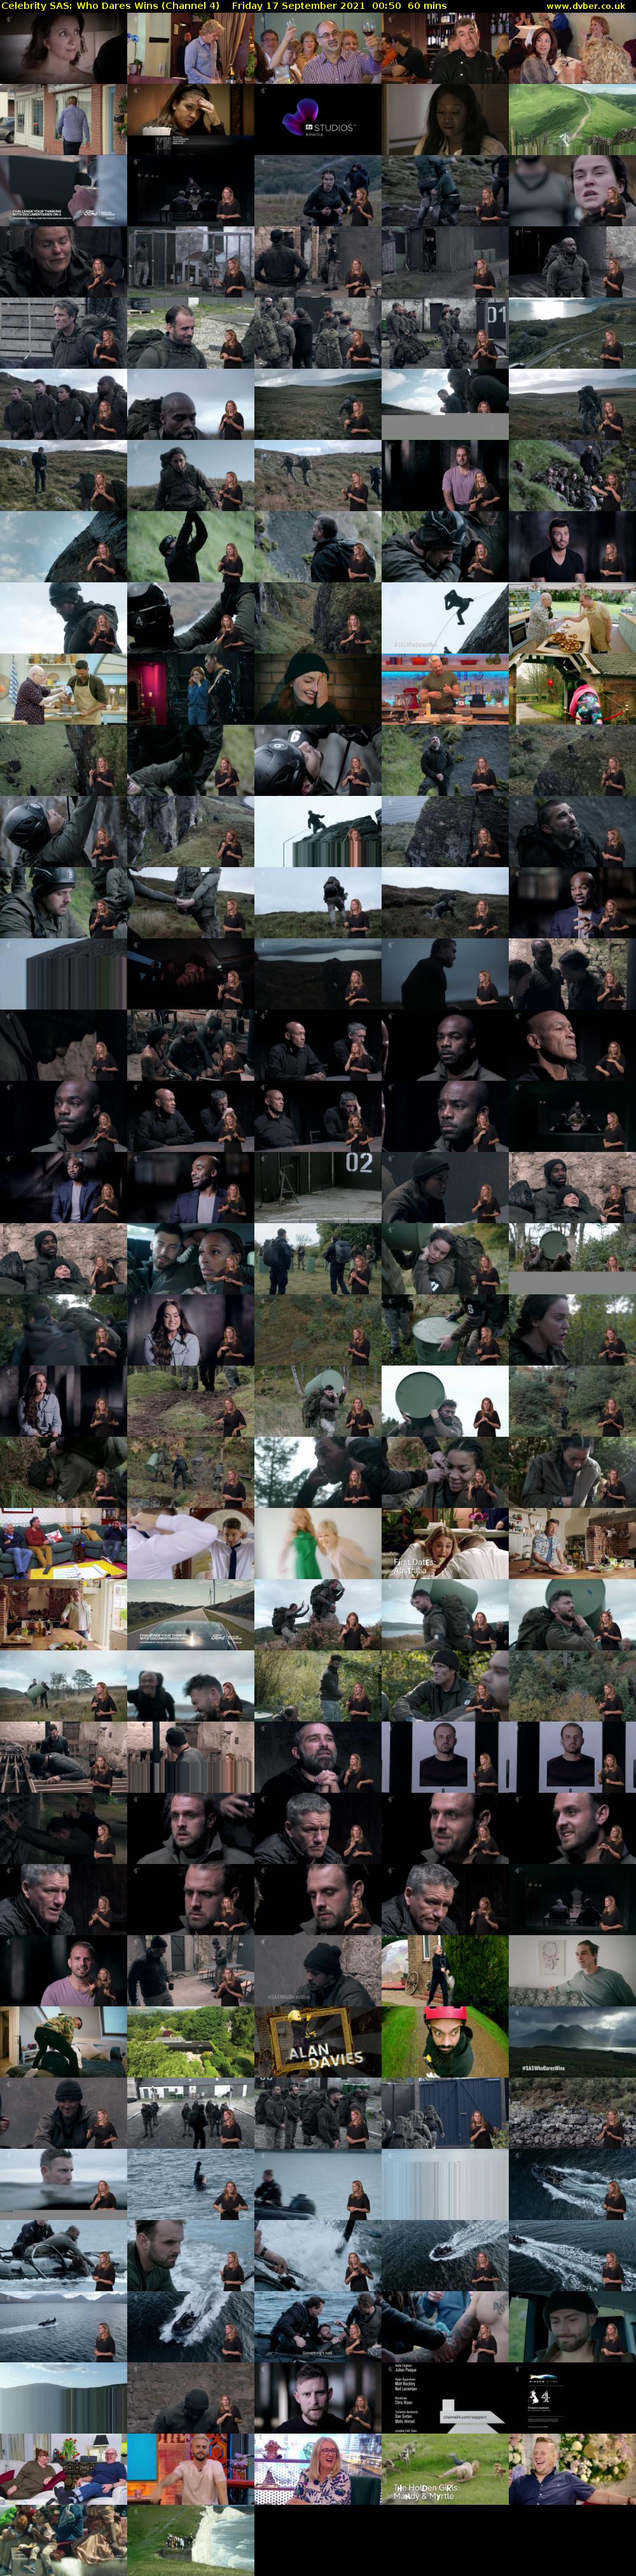 Celebrity SAS: Who Dares Wins (Channel 4) Friday 17 September 2021 00:50 - 01:50